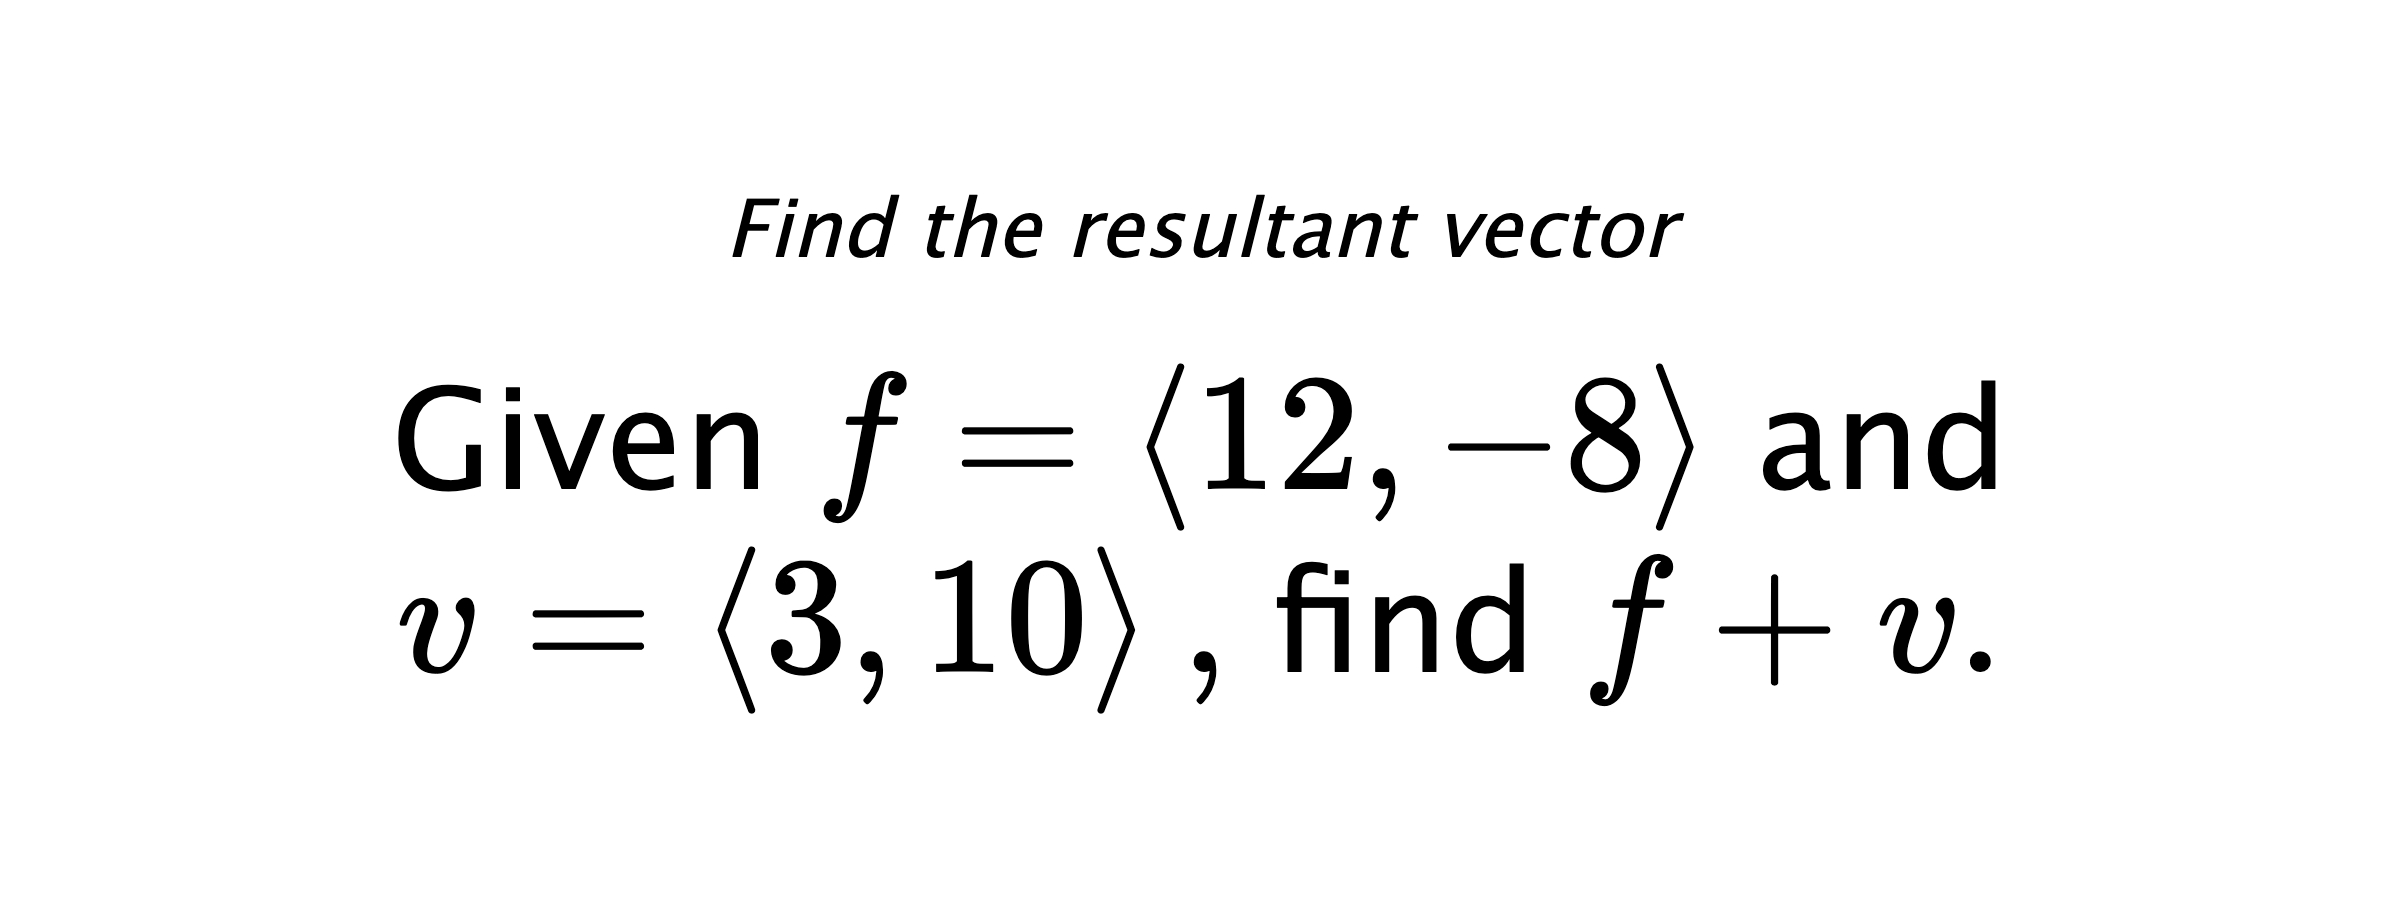 Find the resultant vector Given $ f = \left< 12,-8 \right> $ and $ v = \left< 3,10 \right> ,$ find $ f+v .$